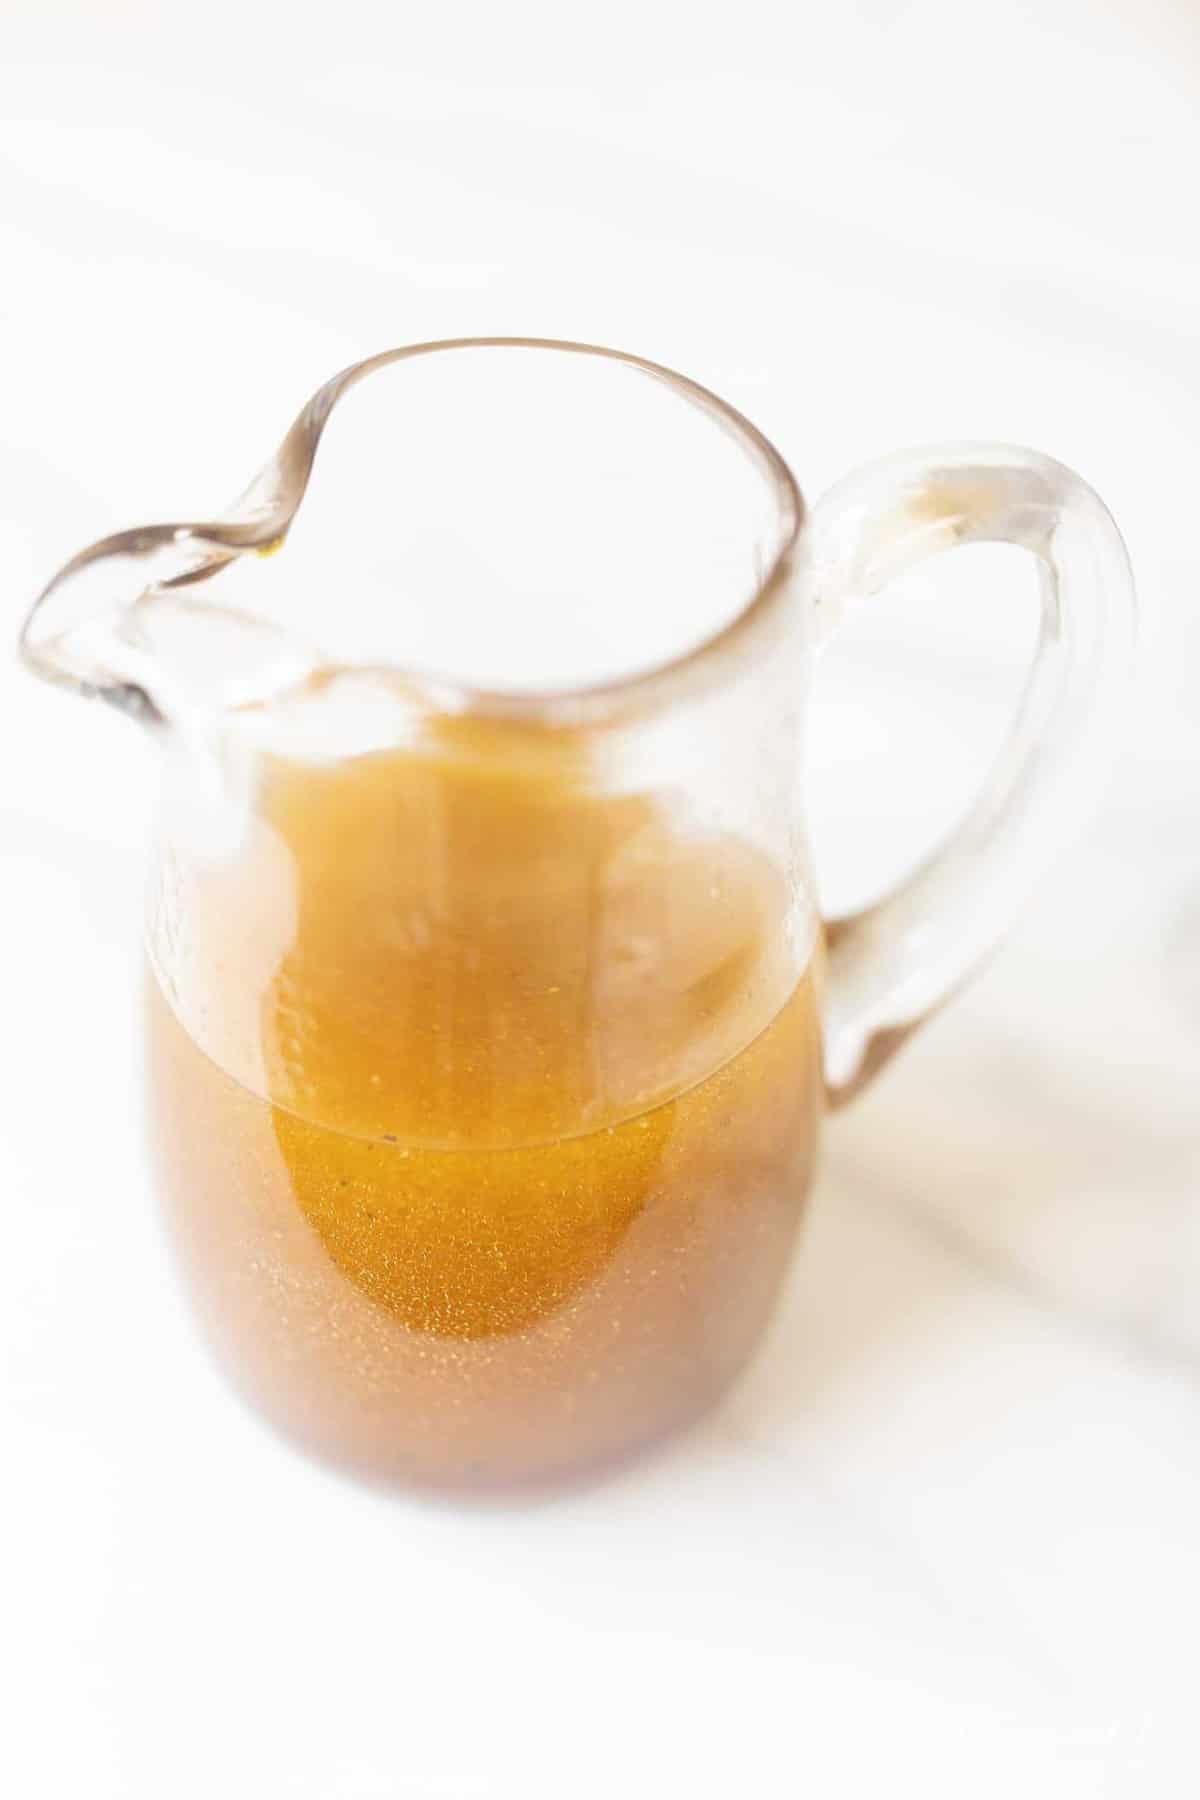 Marble surface with a small pitcher full of an easy homemade vinaigrette recipe.